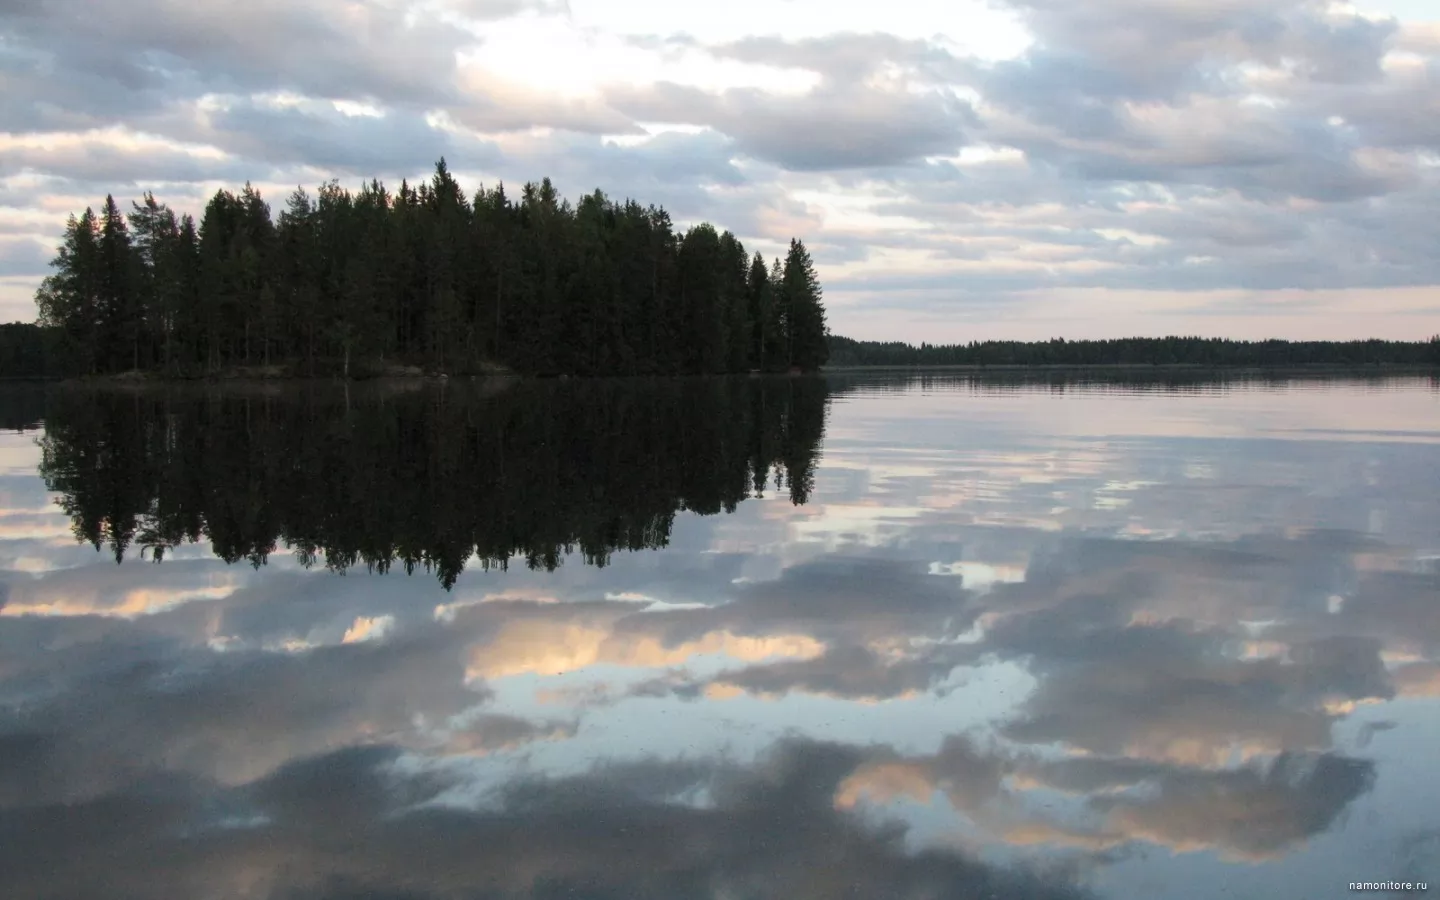 Reflections, forest, island, lake, landscapes, nature x